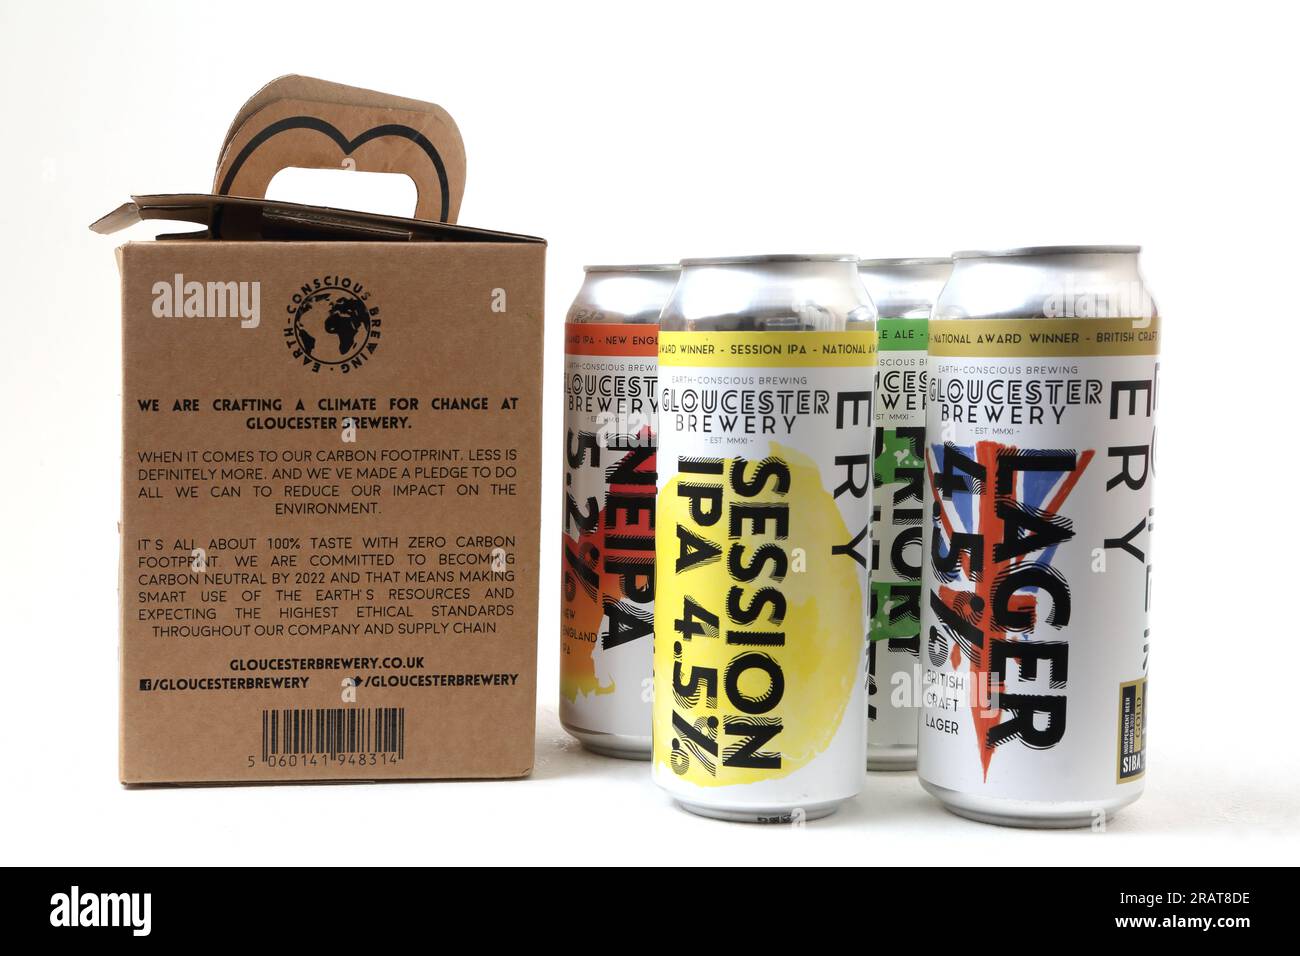 Gloucester Brewery Beer, Lager and Ale Earth Conscious Brewing  aiming for Zero Carbon Footprint Four Pack Gift Set Stock Photo